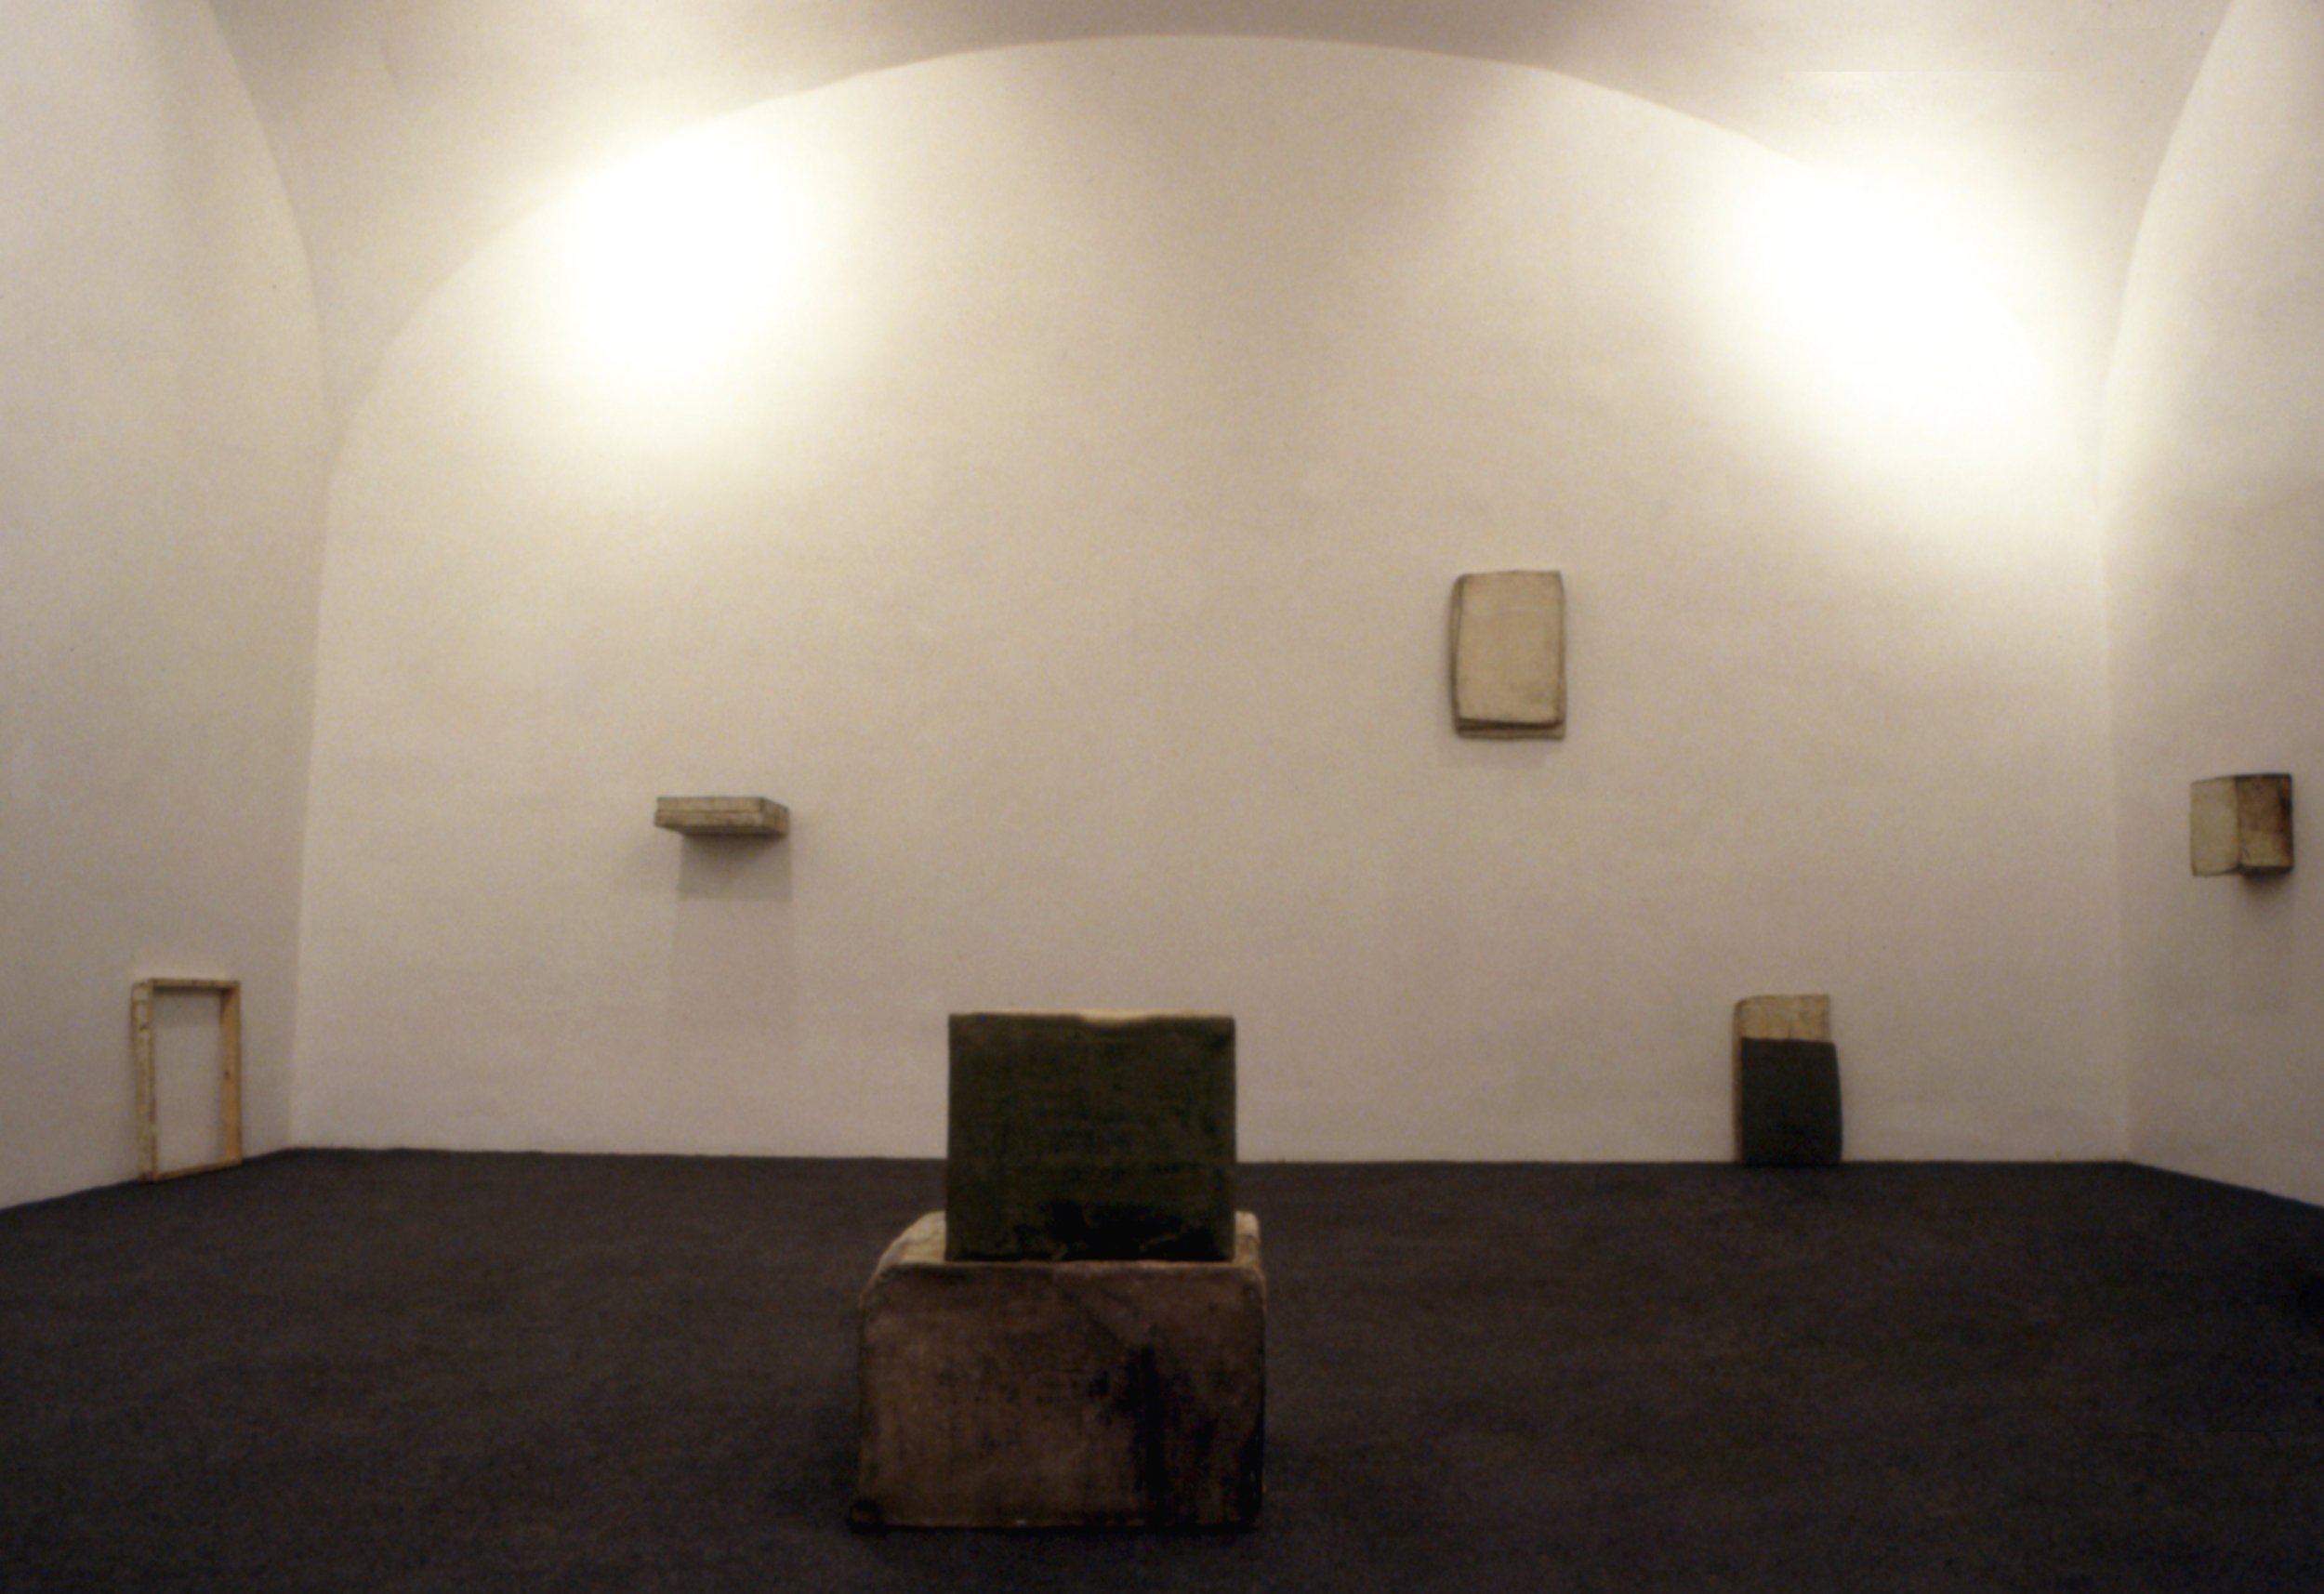 2. Lawrence Carroll - John Millei, Paintings, 11 May 1995, installation view.jpg